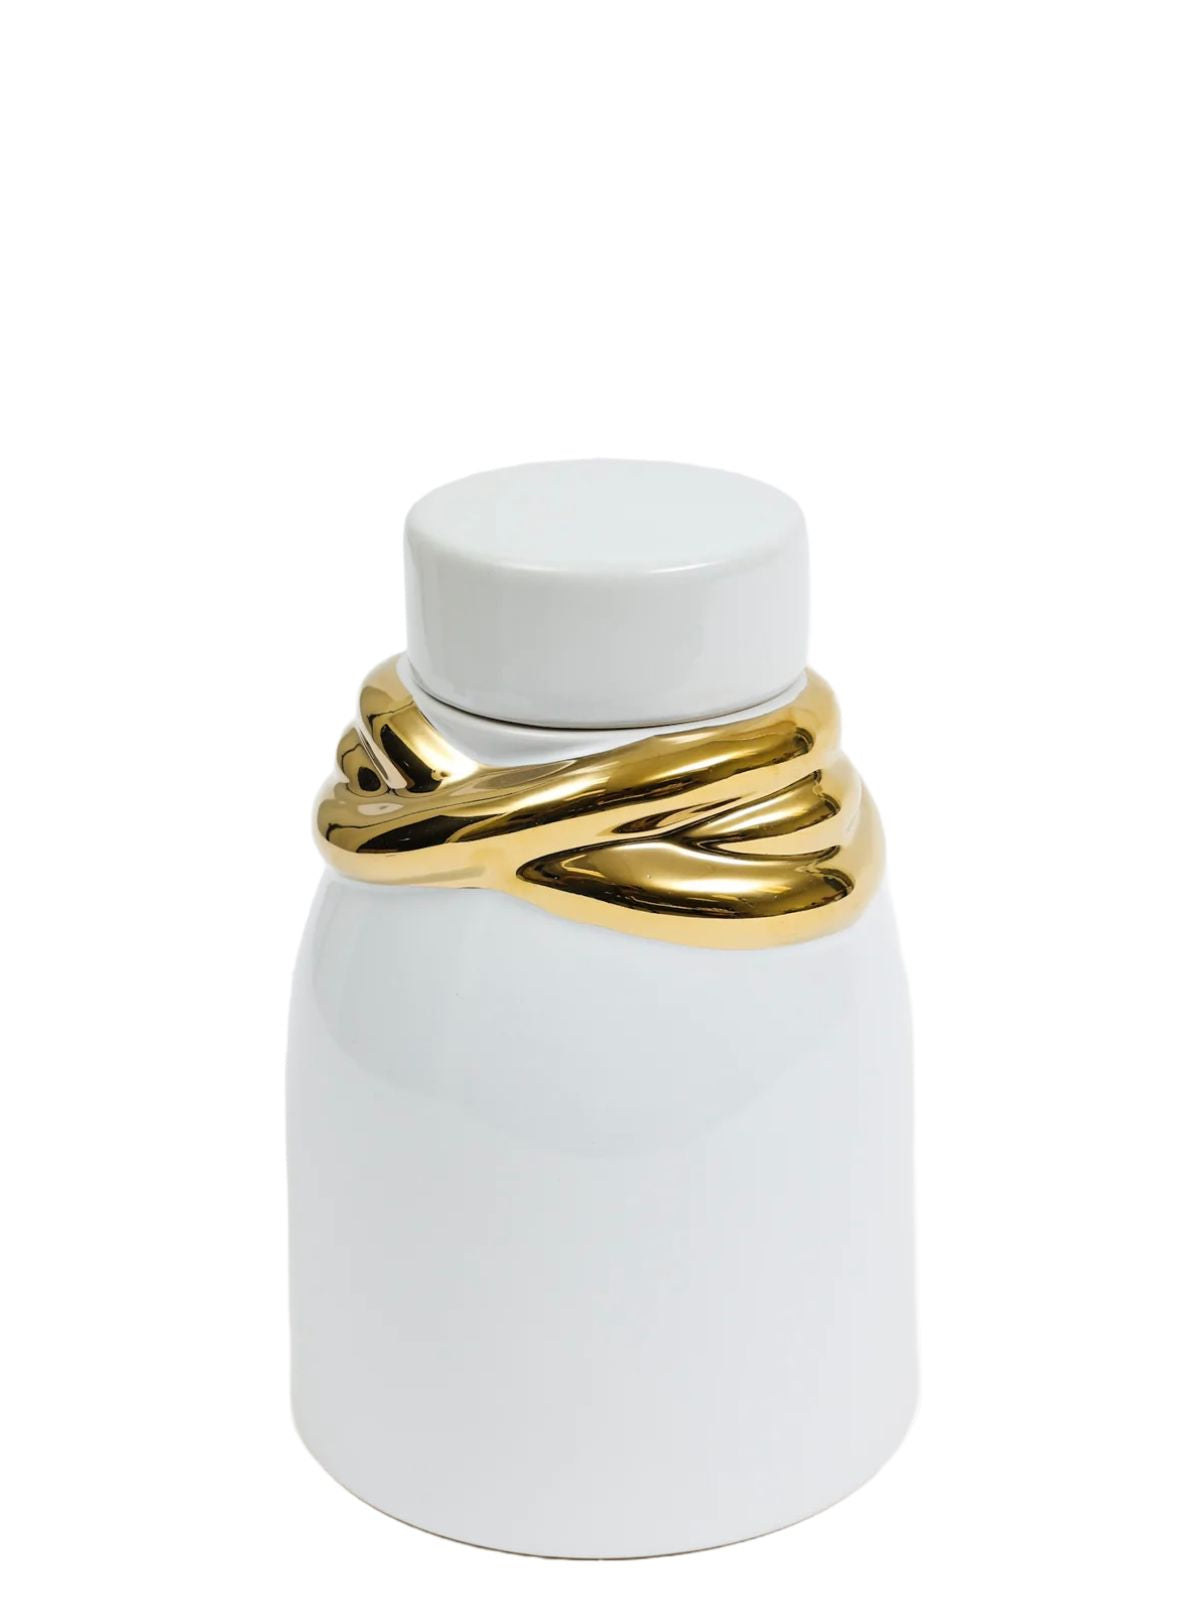 White Glossy Ceramic Lidded Jar with Stunning Gold Details, 6W x 9H.